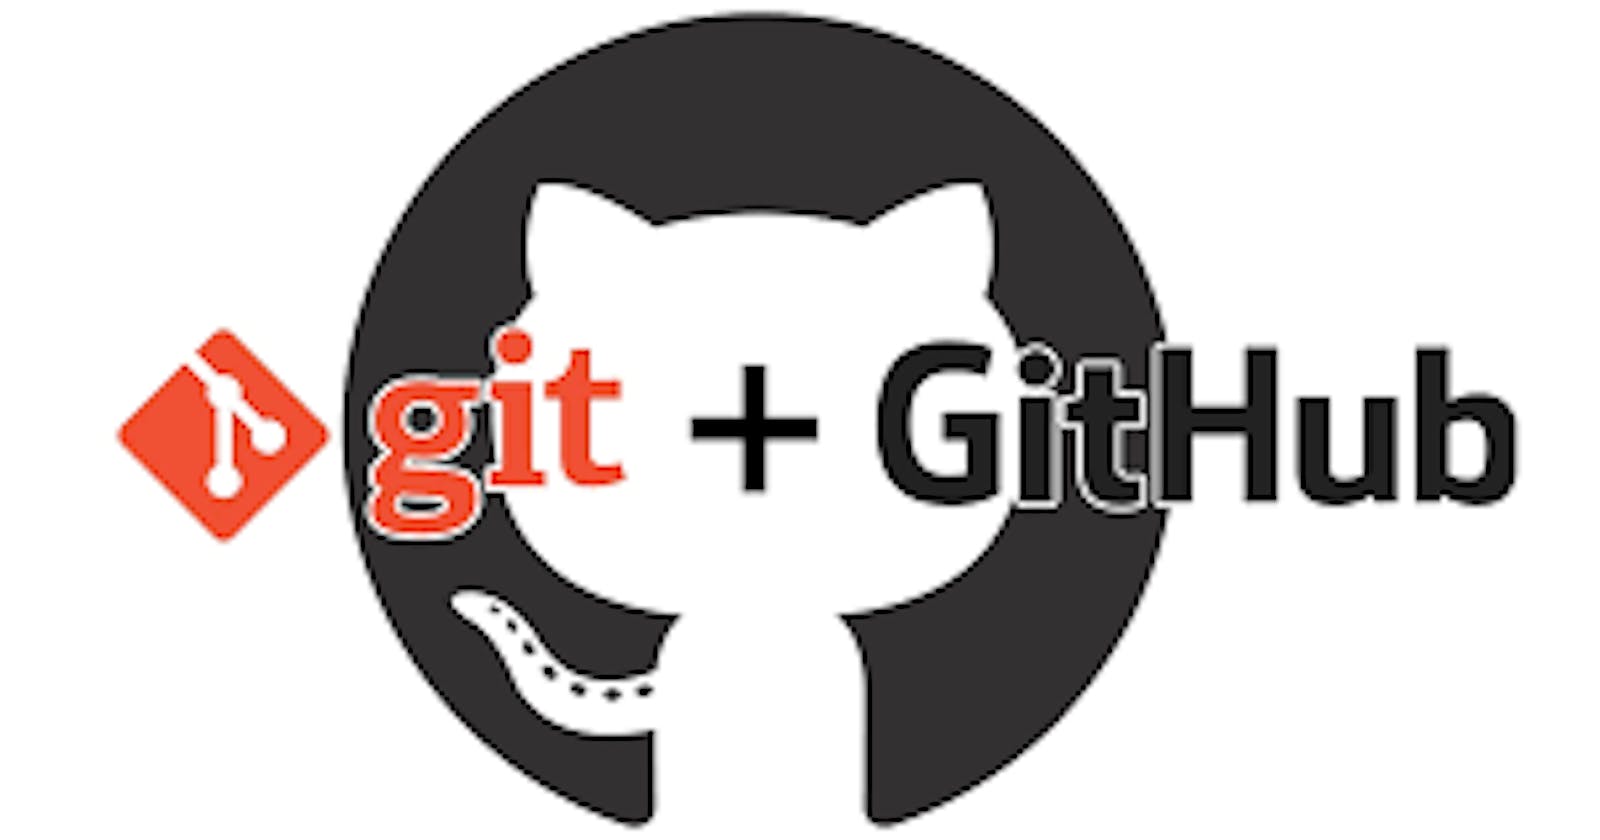 Getting Started on Git and GitHub